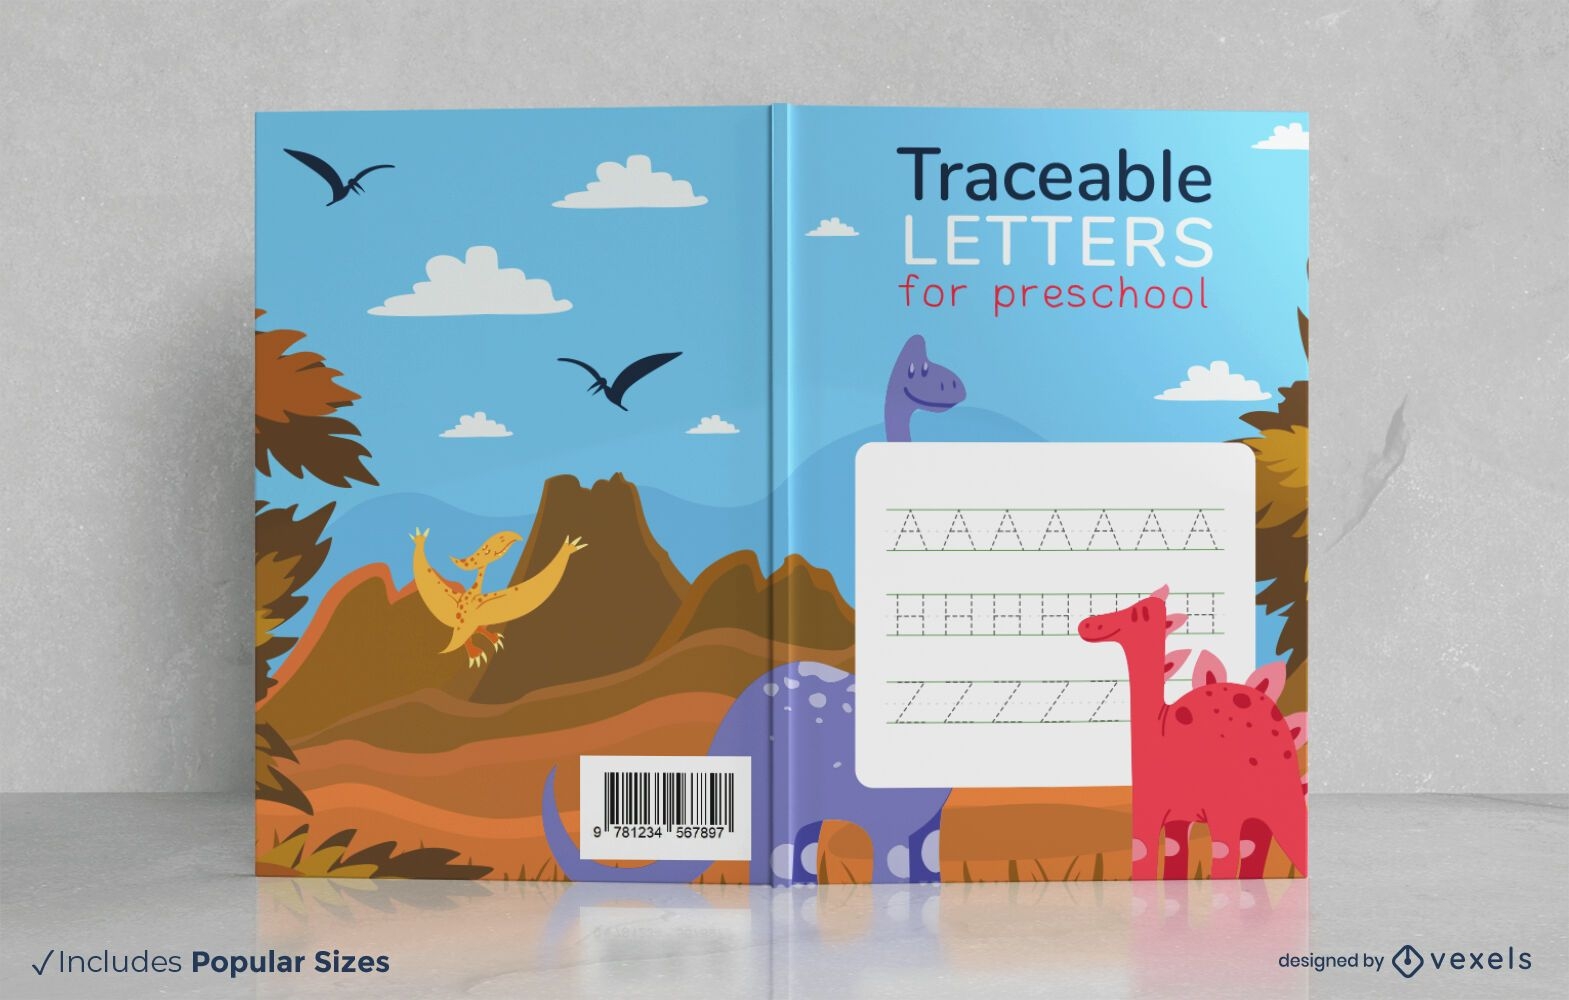 Traceable letters book cover design